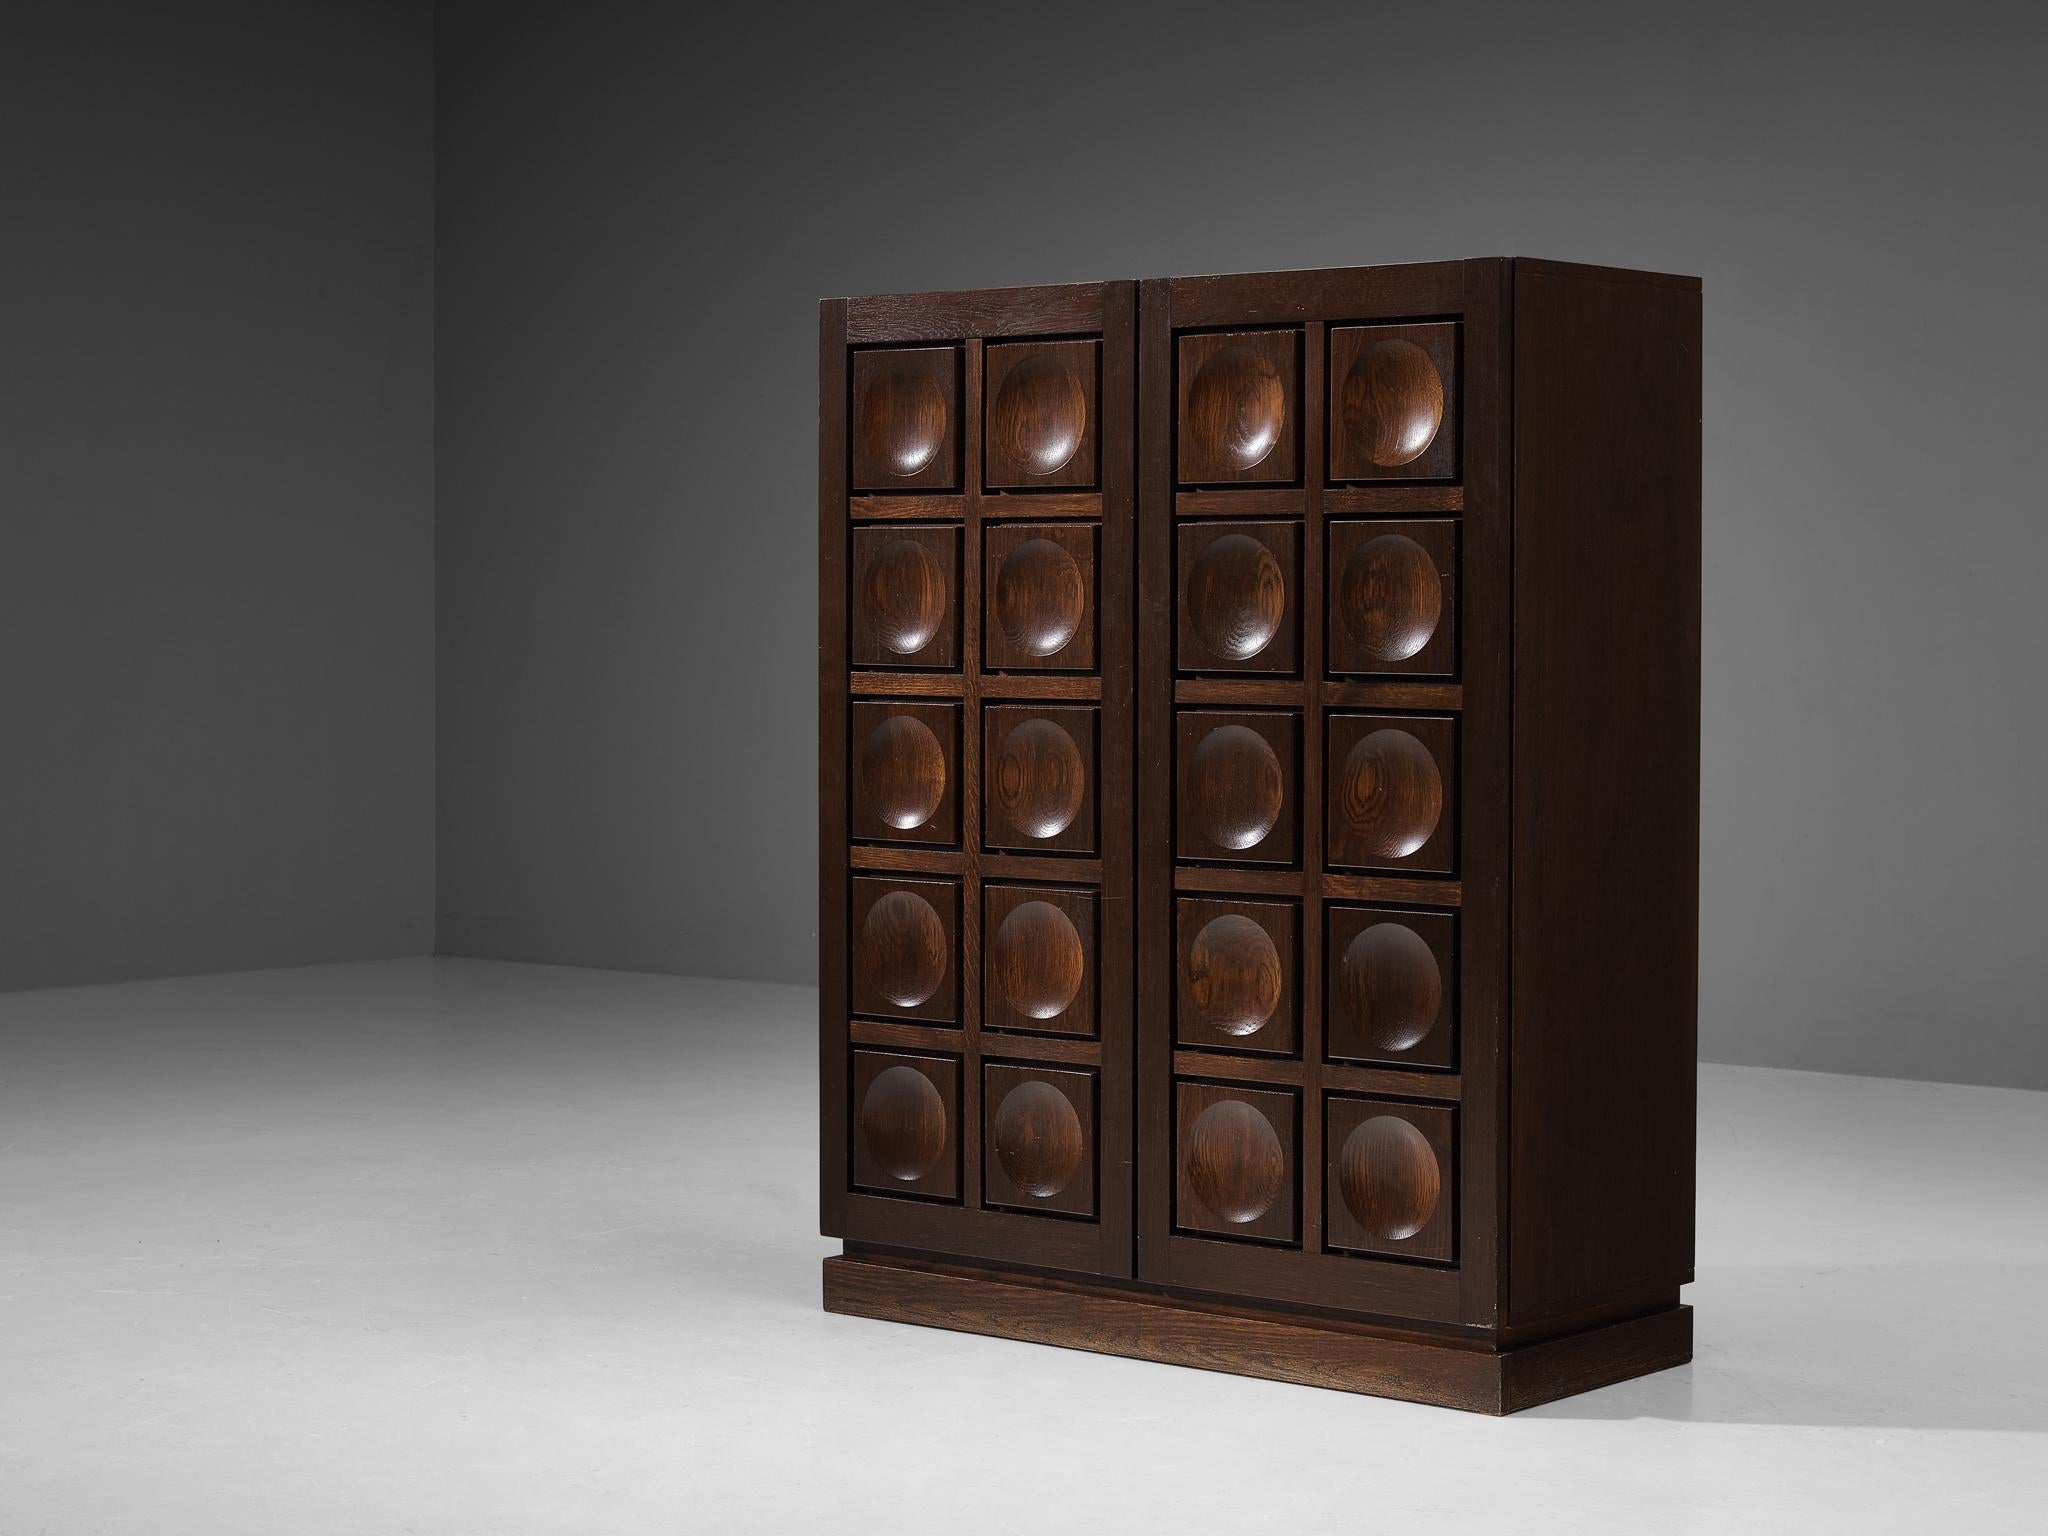 Highboard or cupboard, oak, Belgium, 1970s.

This very evocative cabinet features a clear rhythm and flow established by means of a well thought through lay out that is utterly well-balanced. The carved circles immediately catch the eye and are